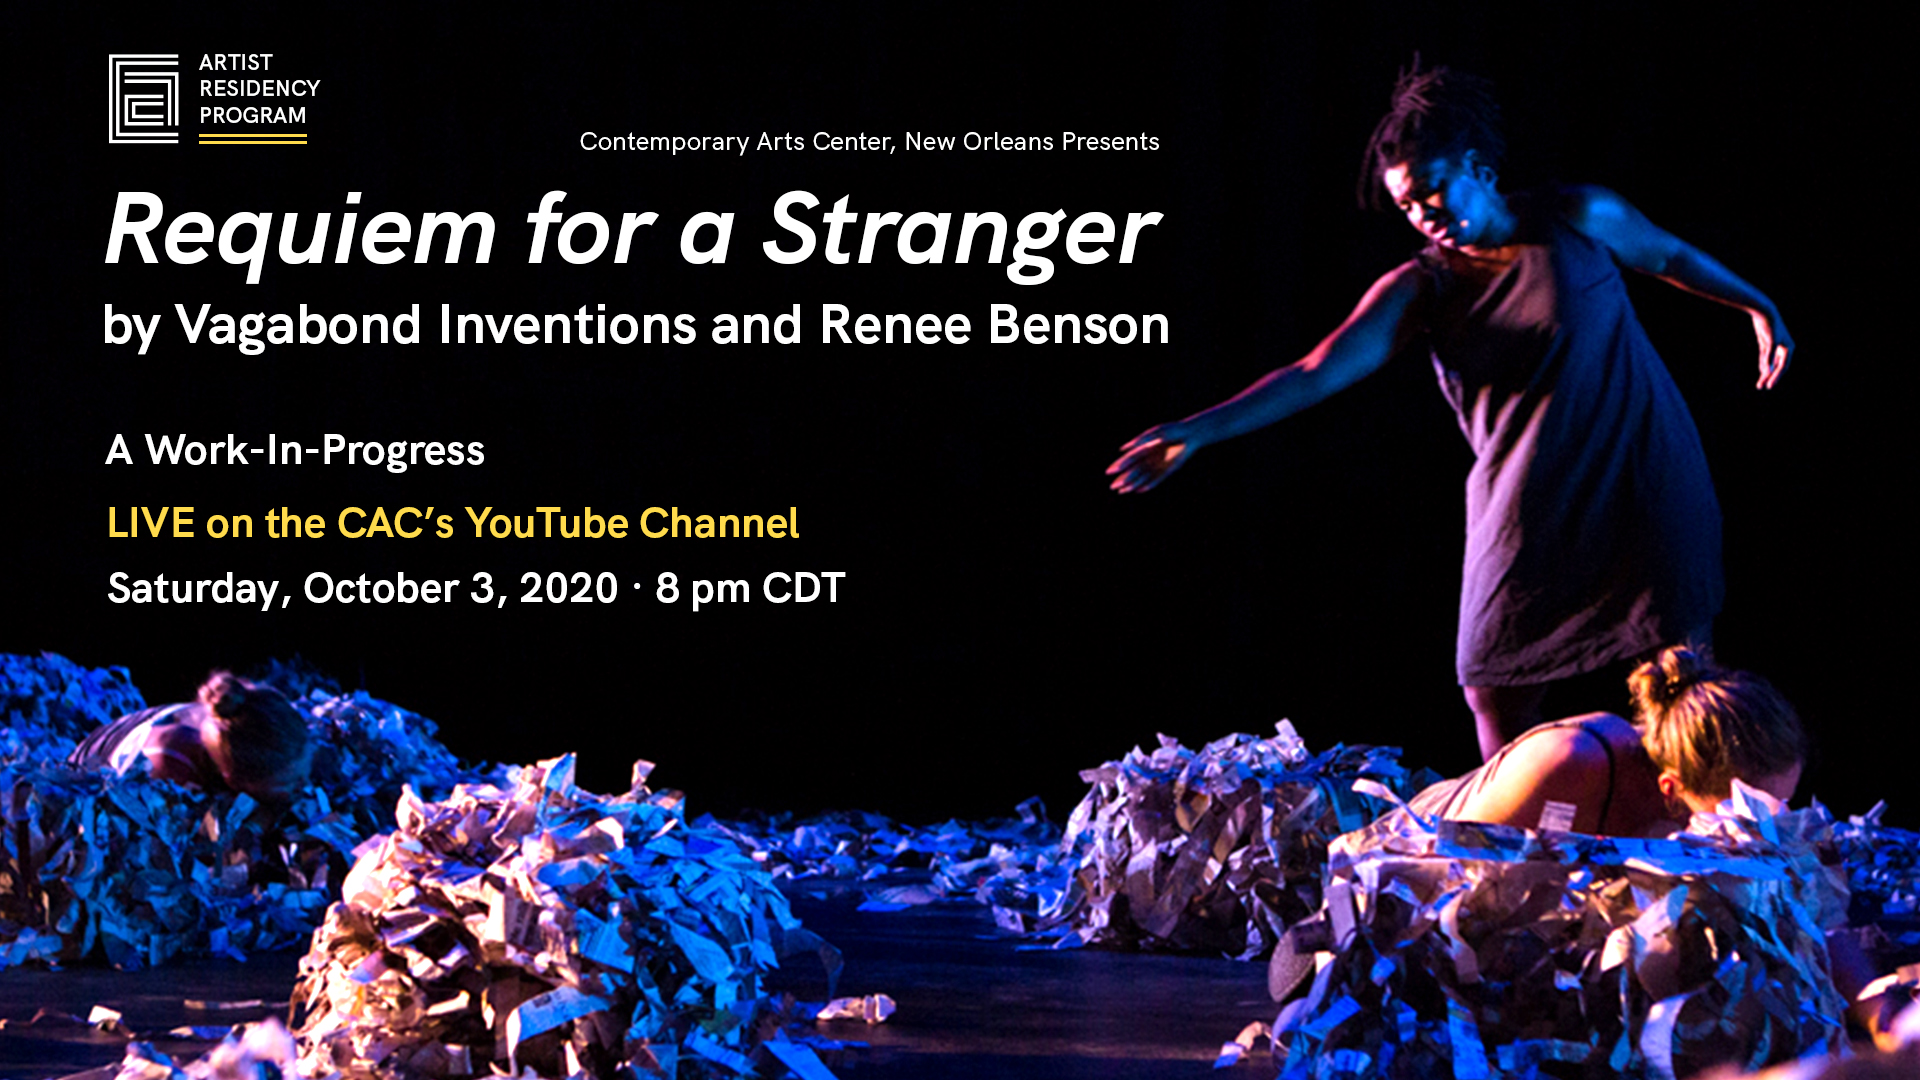 "Requiem for a Stranger" by Vagabond Inventions and Renee Benson - A Work In Progress